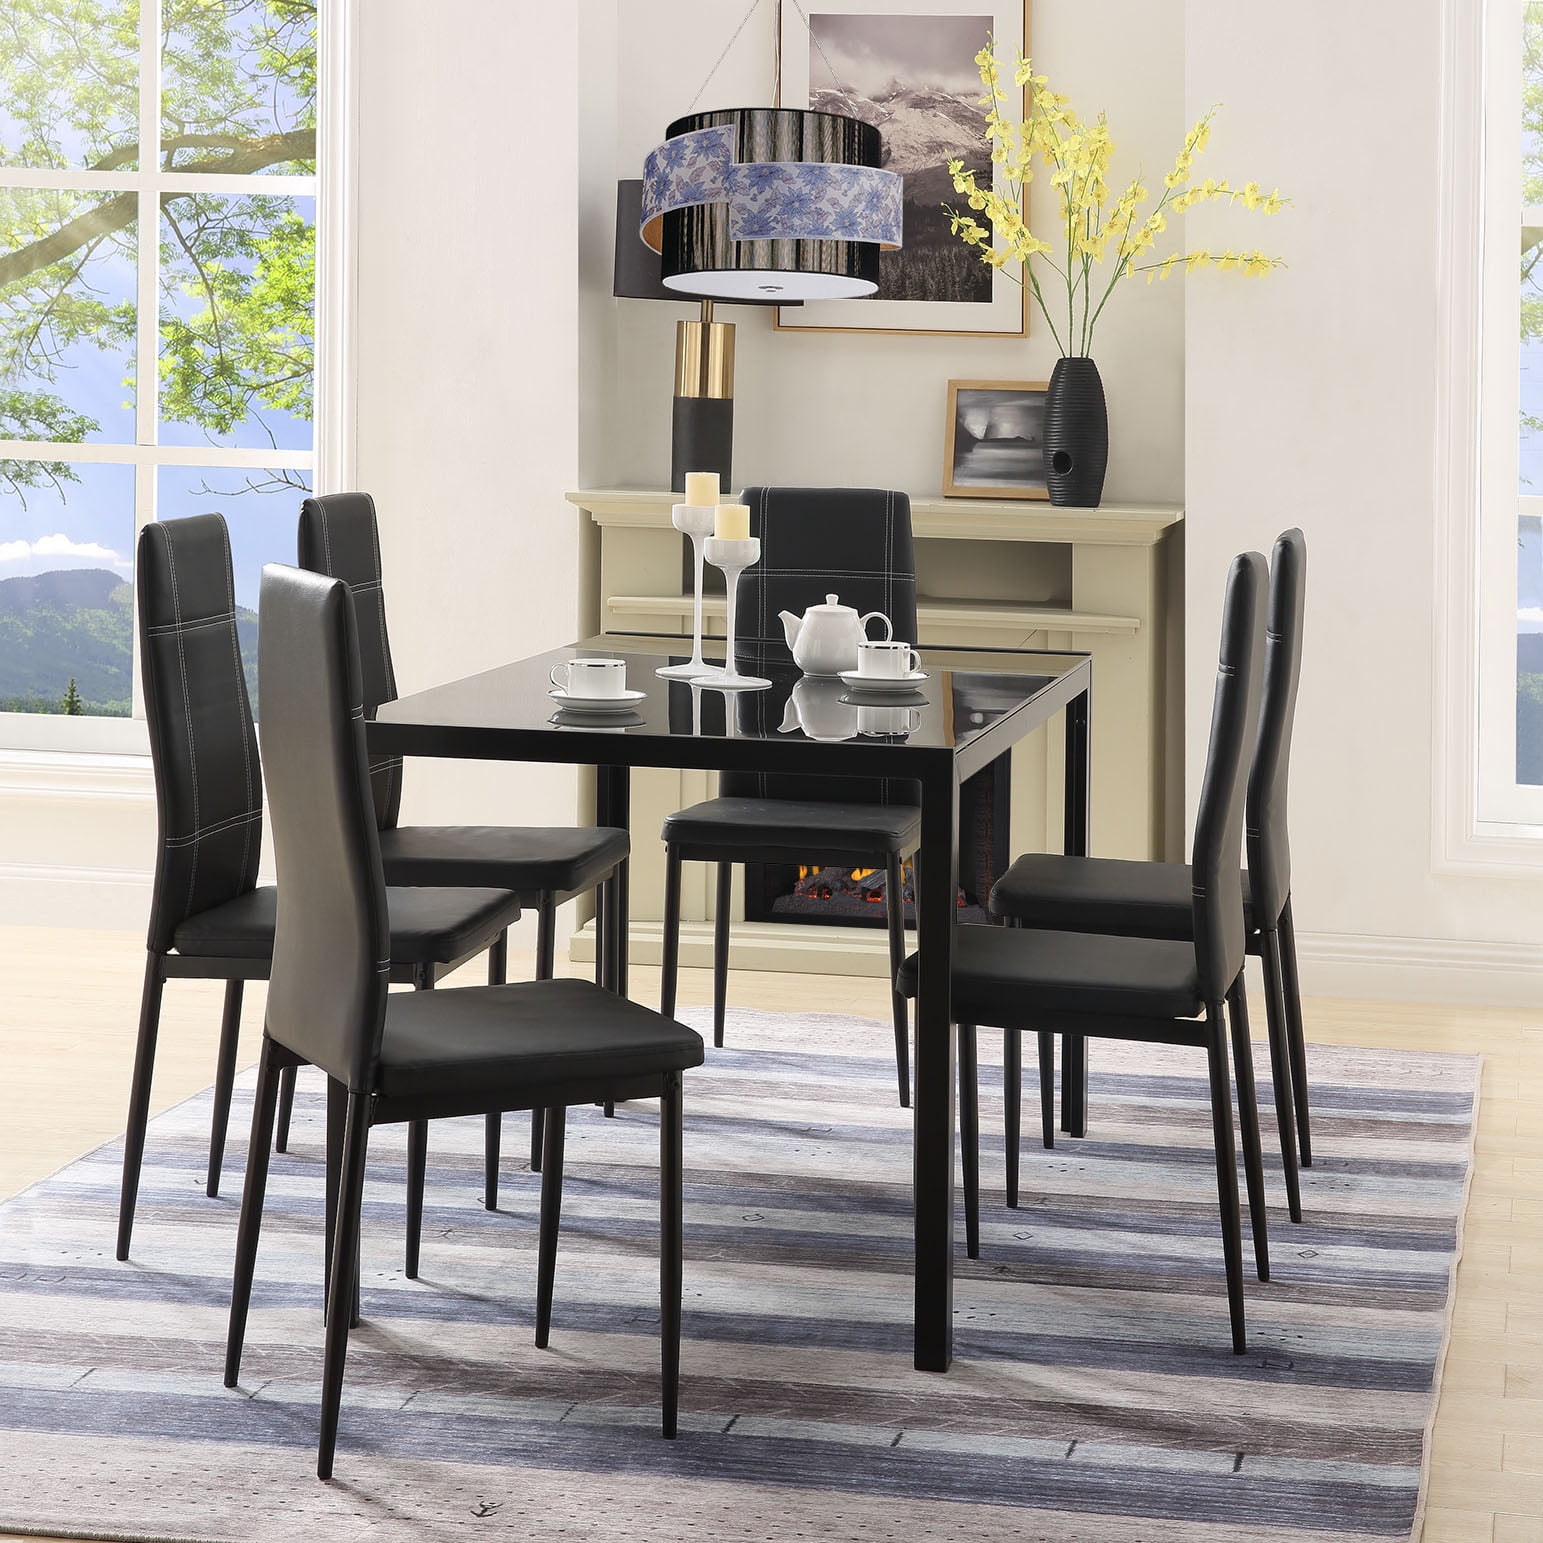 Metal Dining Table Set With 6 Chairs, How Long Is A Table With 6 Chairs